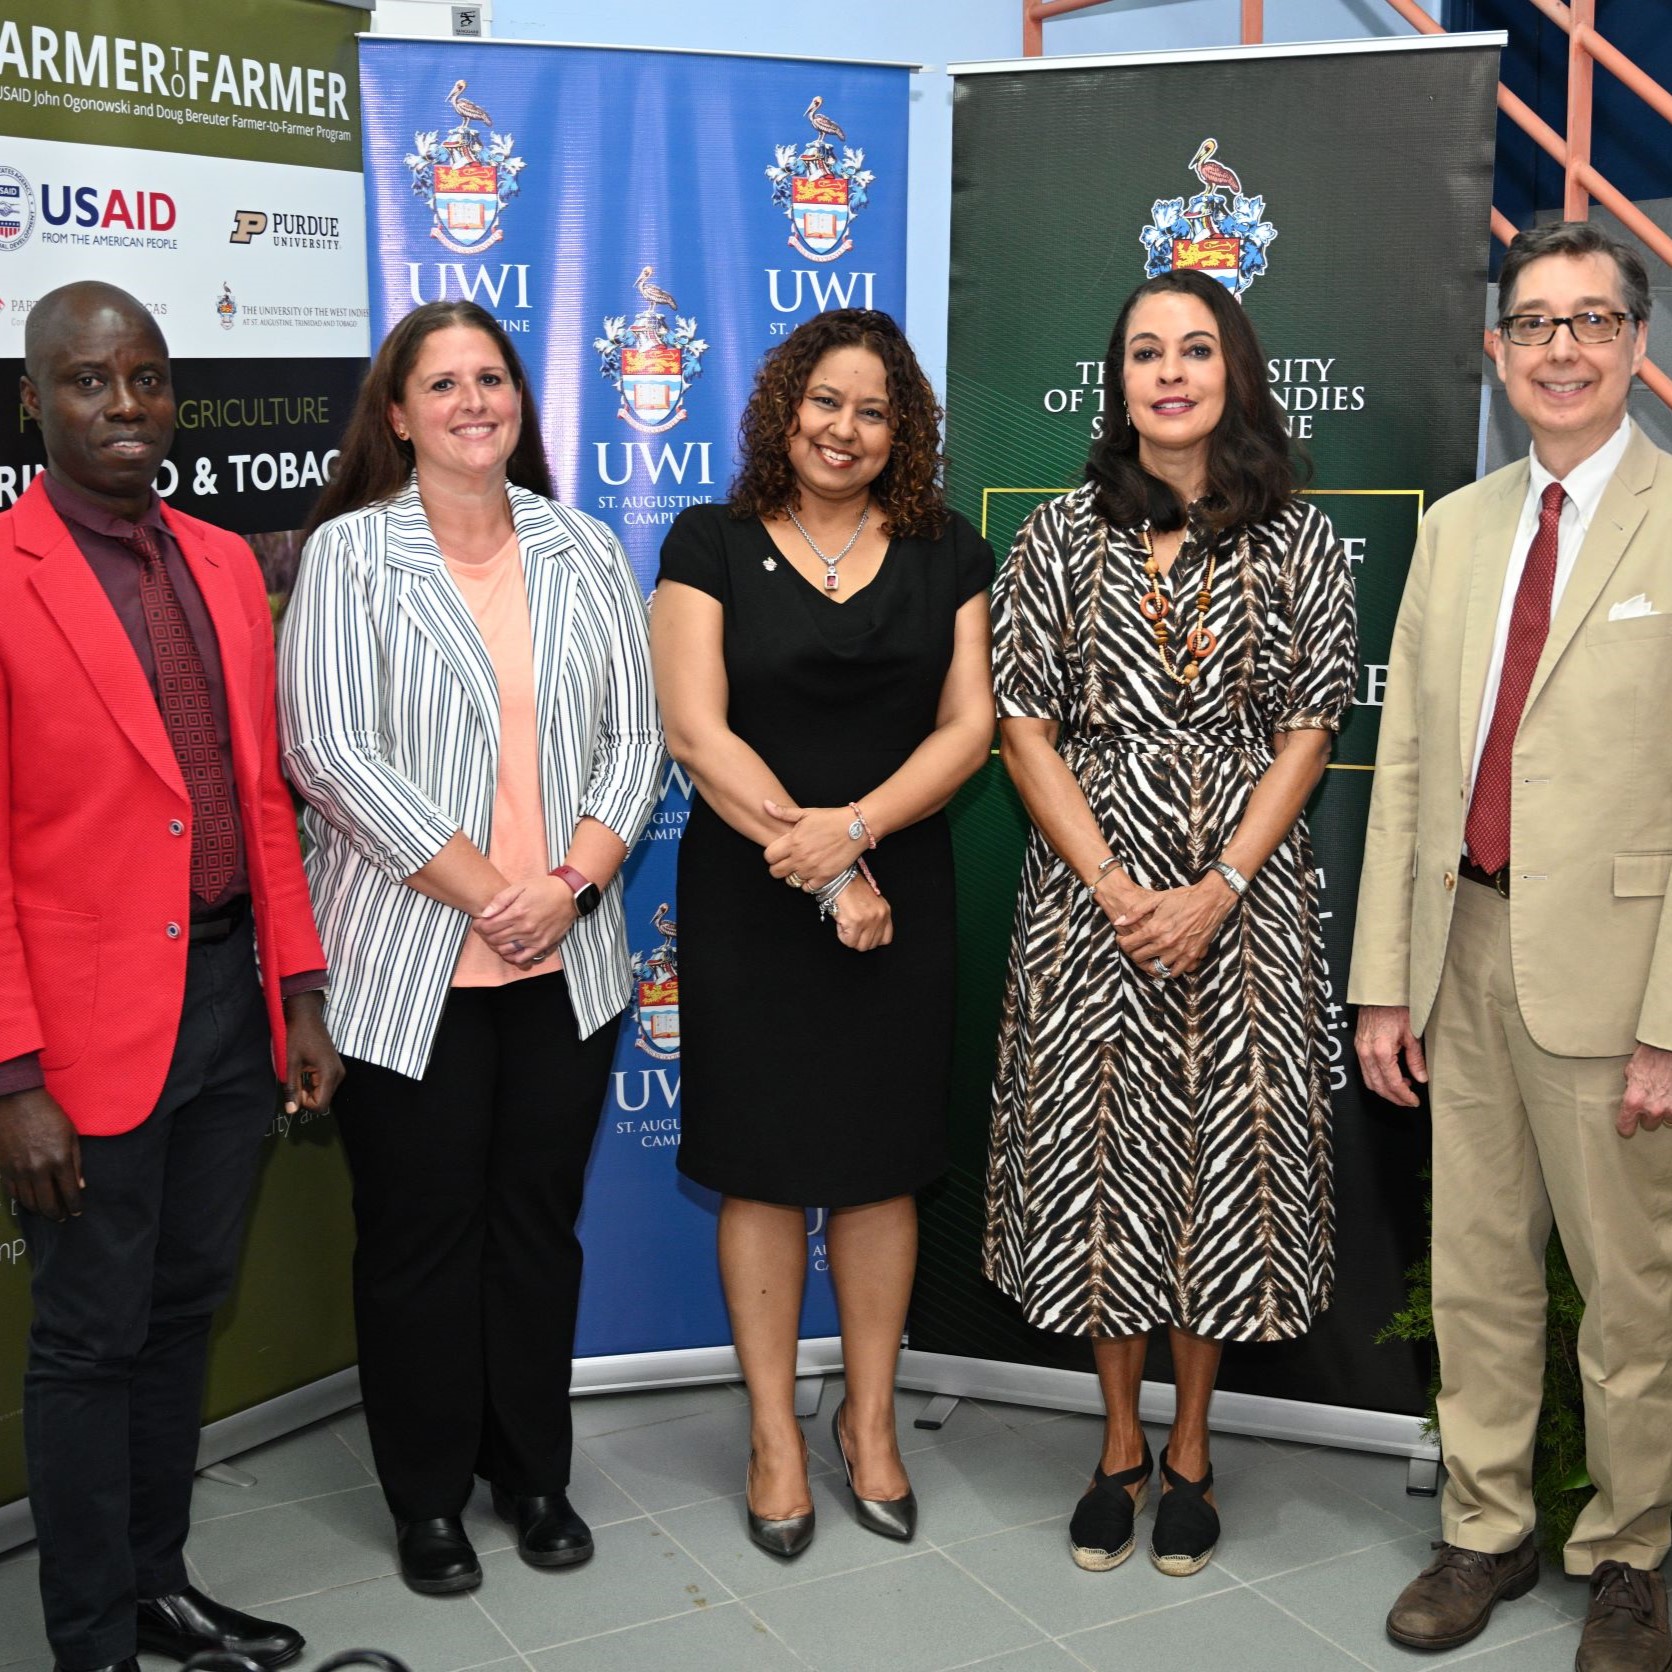 Over 750 persons trained in UWI/USAID Farmer-to-Farmer Programme